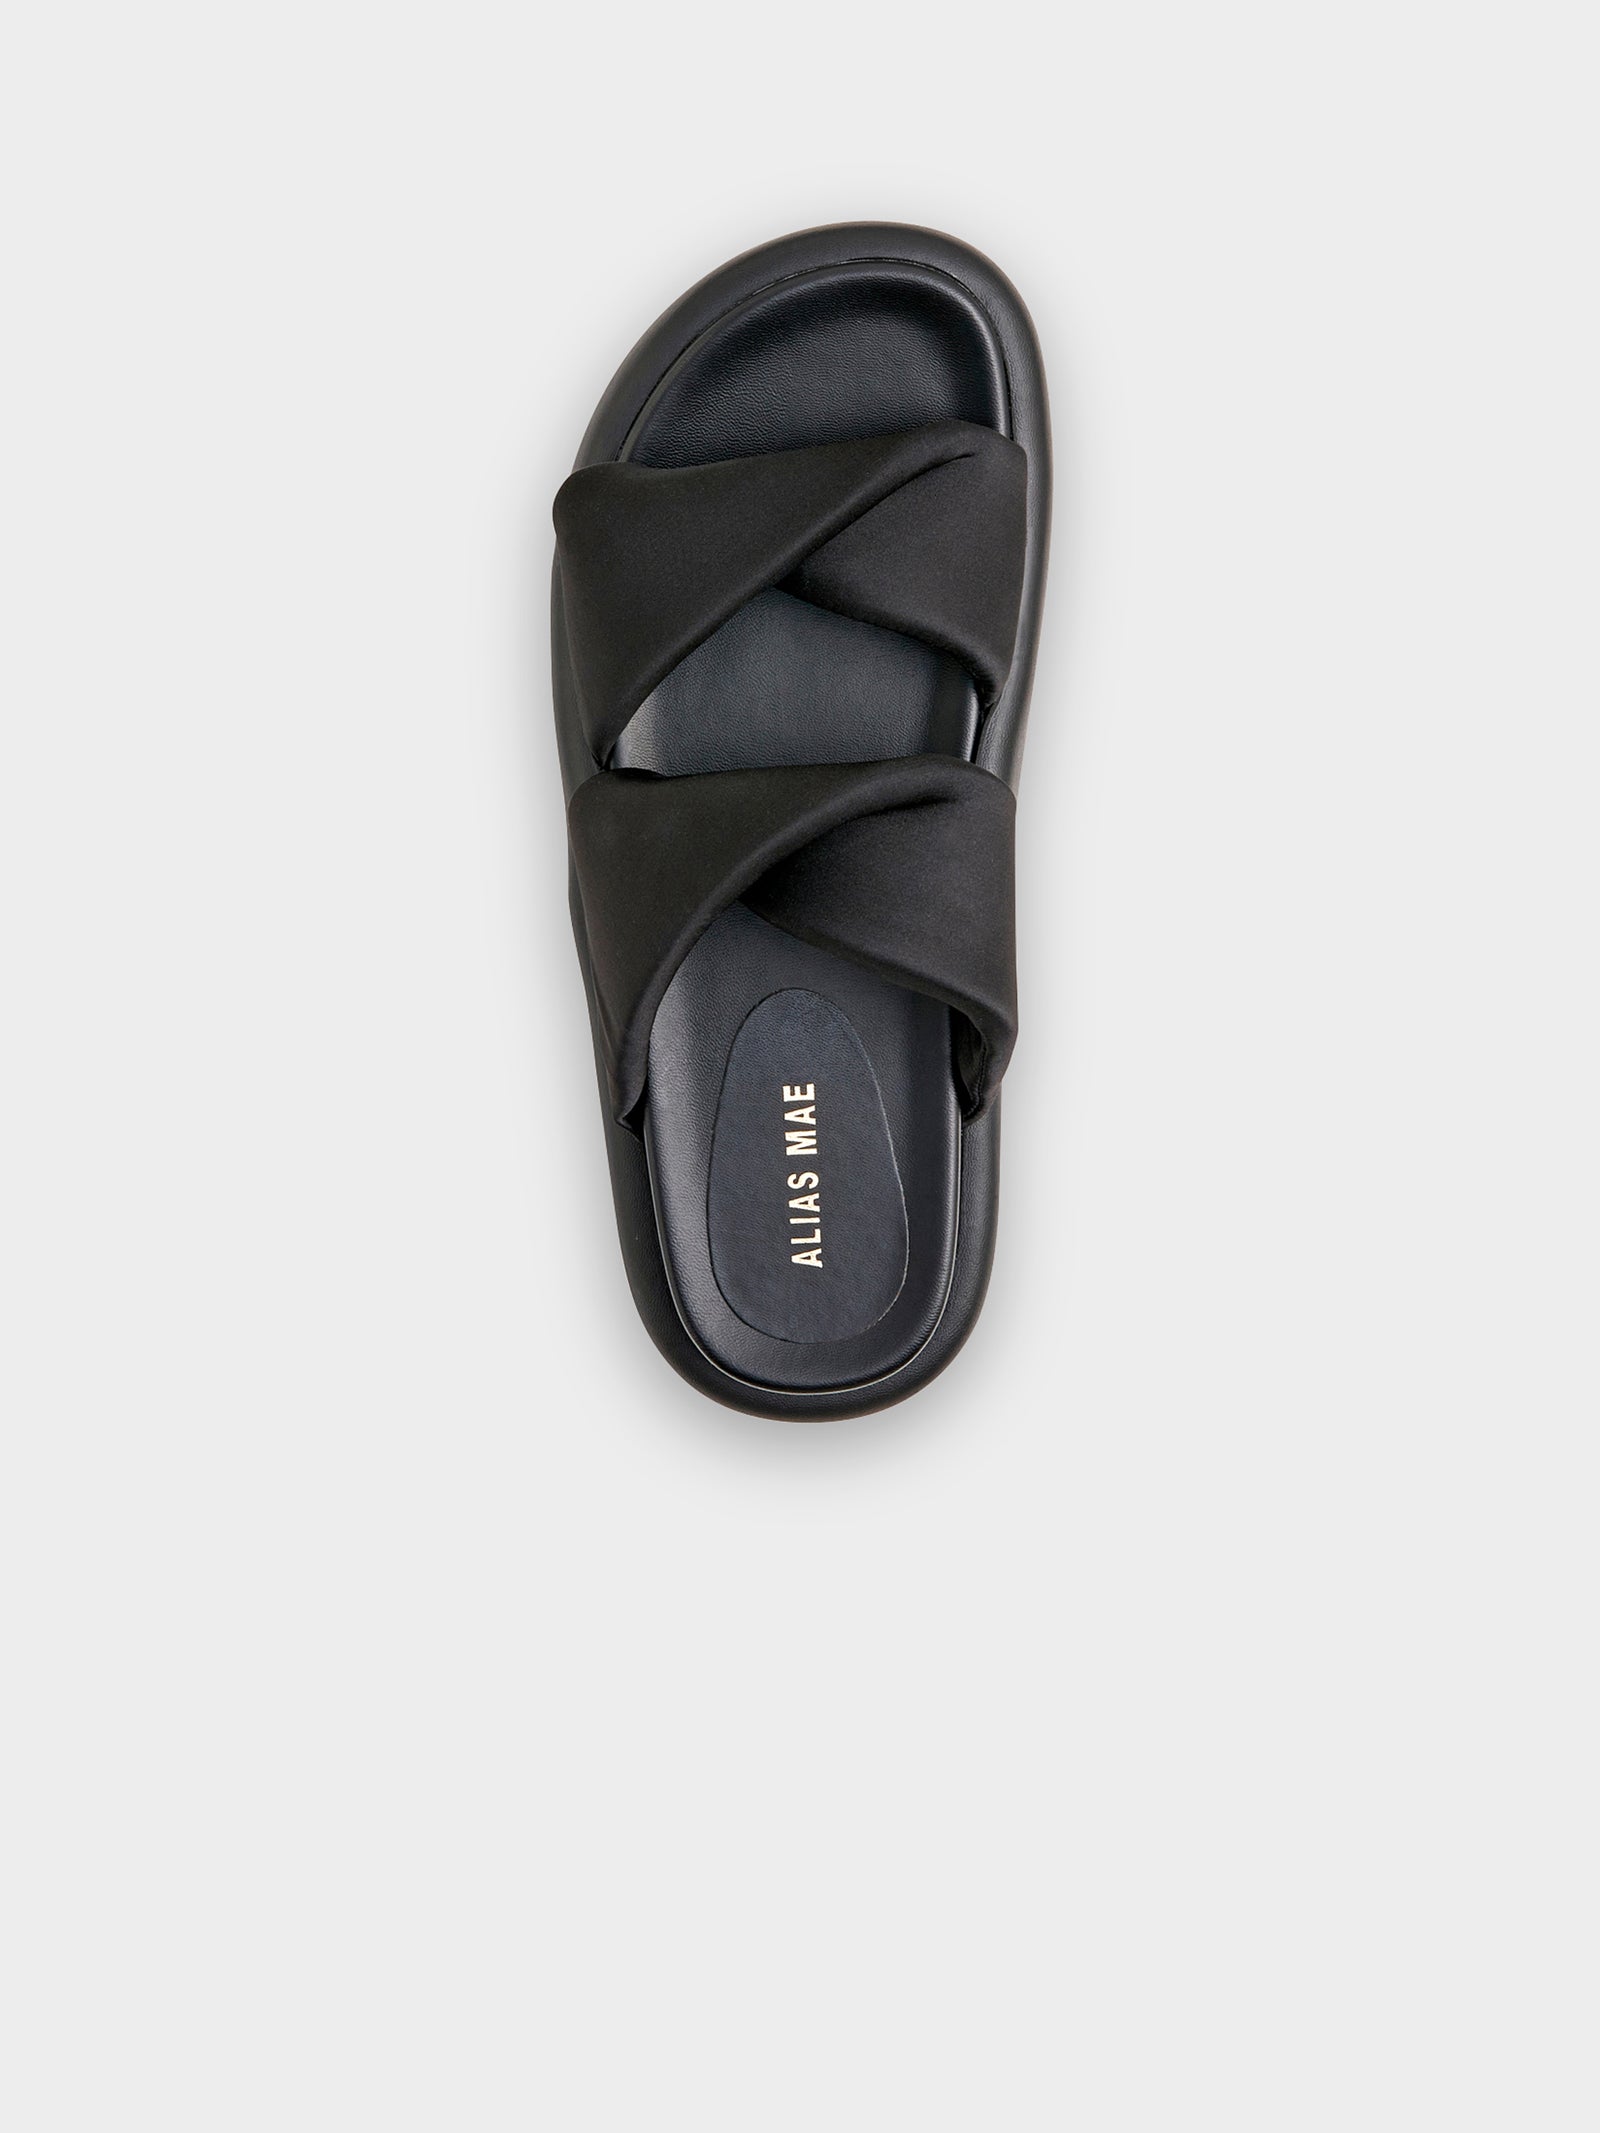 Therese Sandals in Black